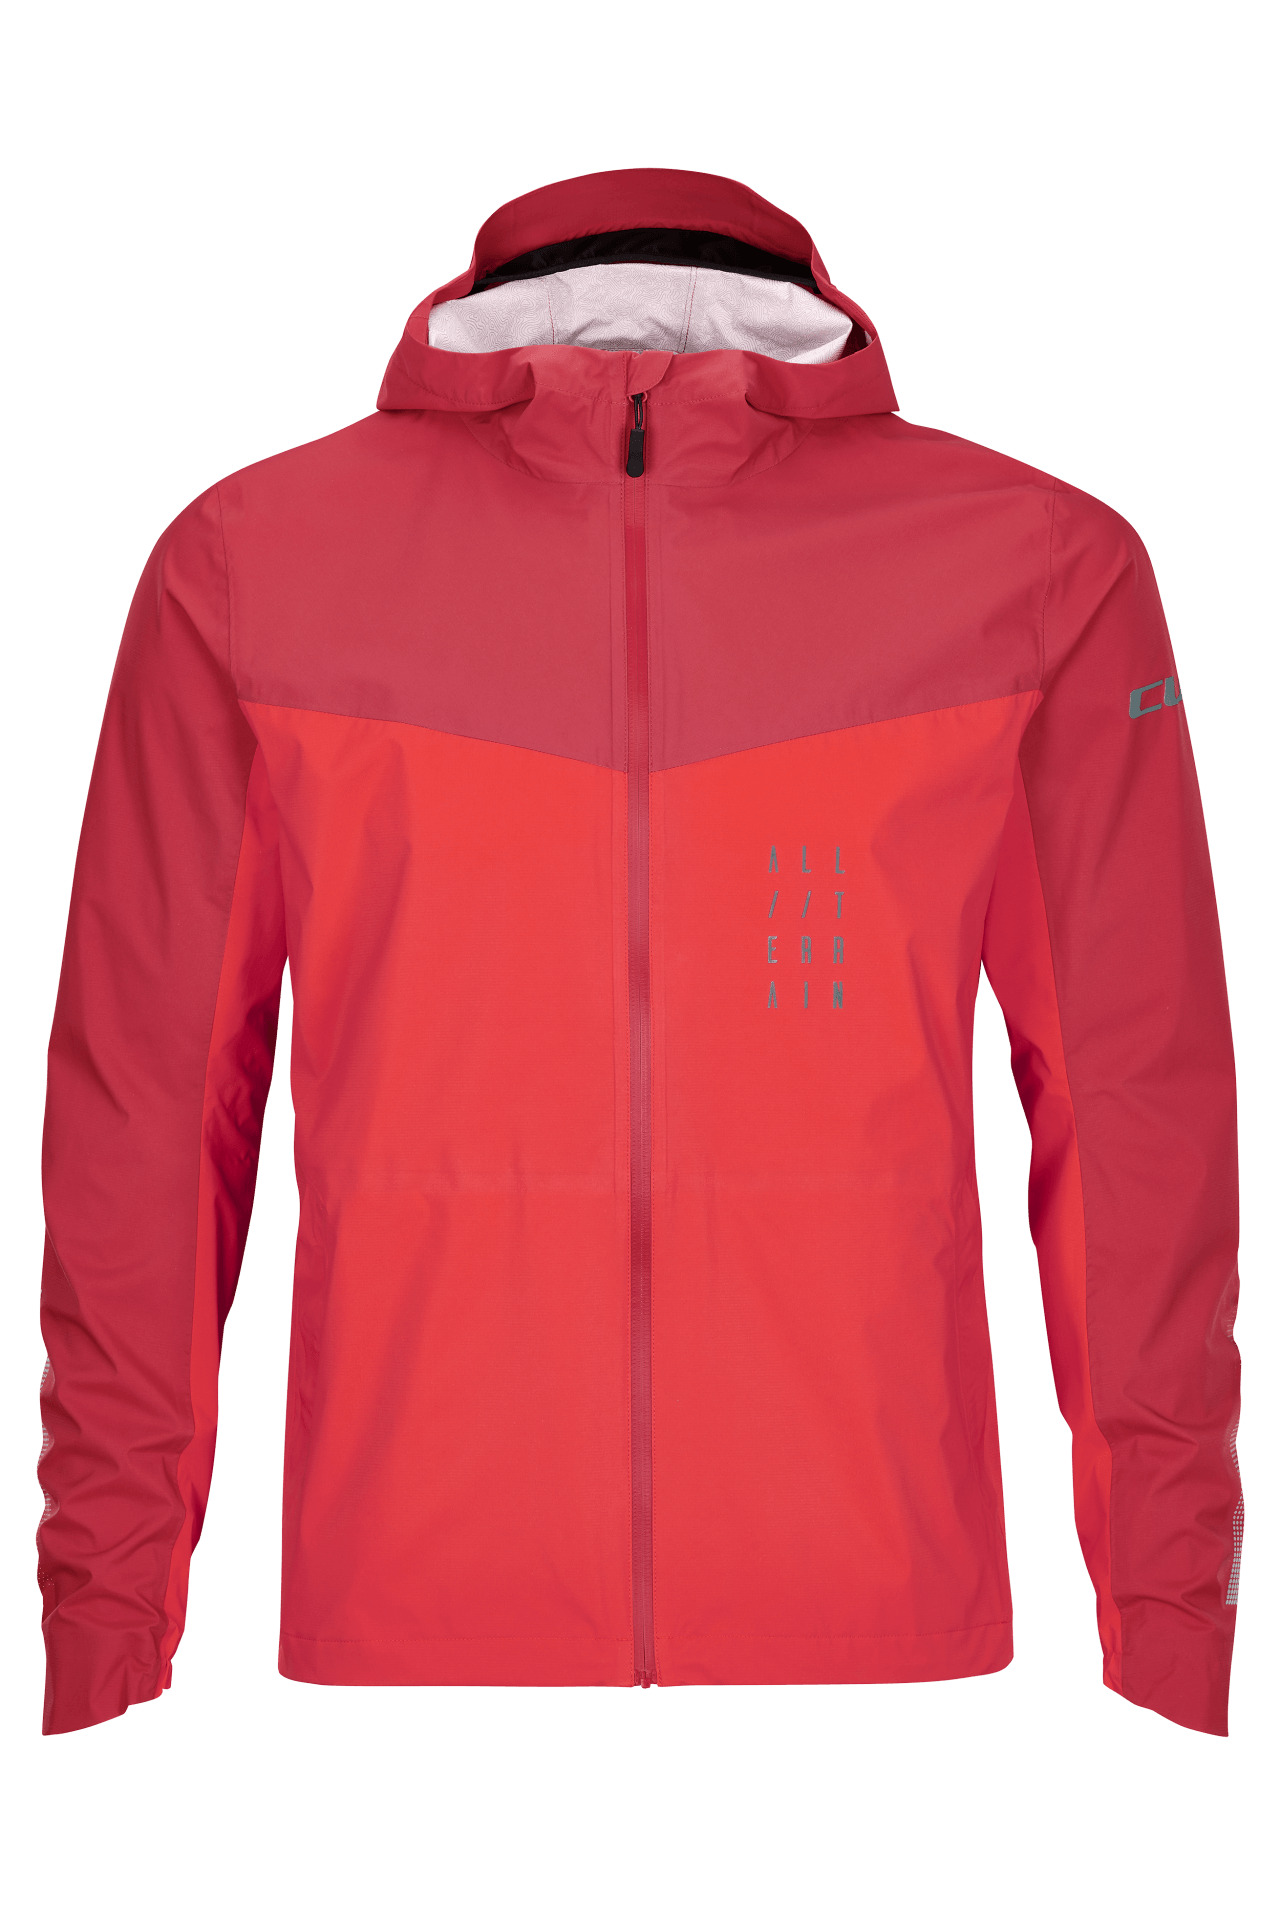 CUBE ATX Storm Jacket X Actionteam red S